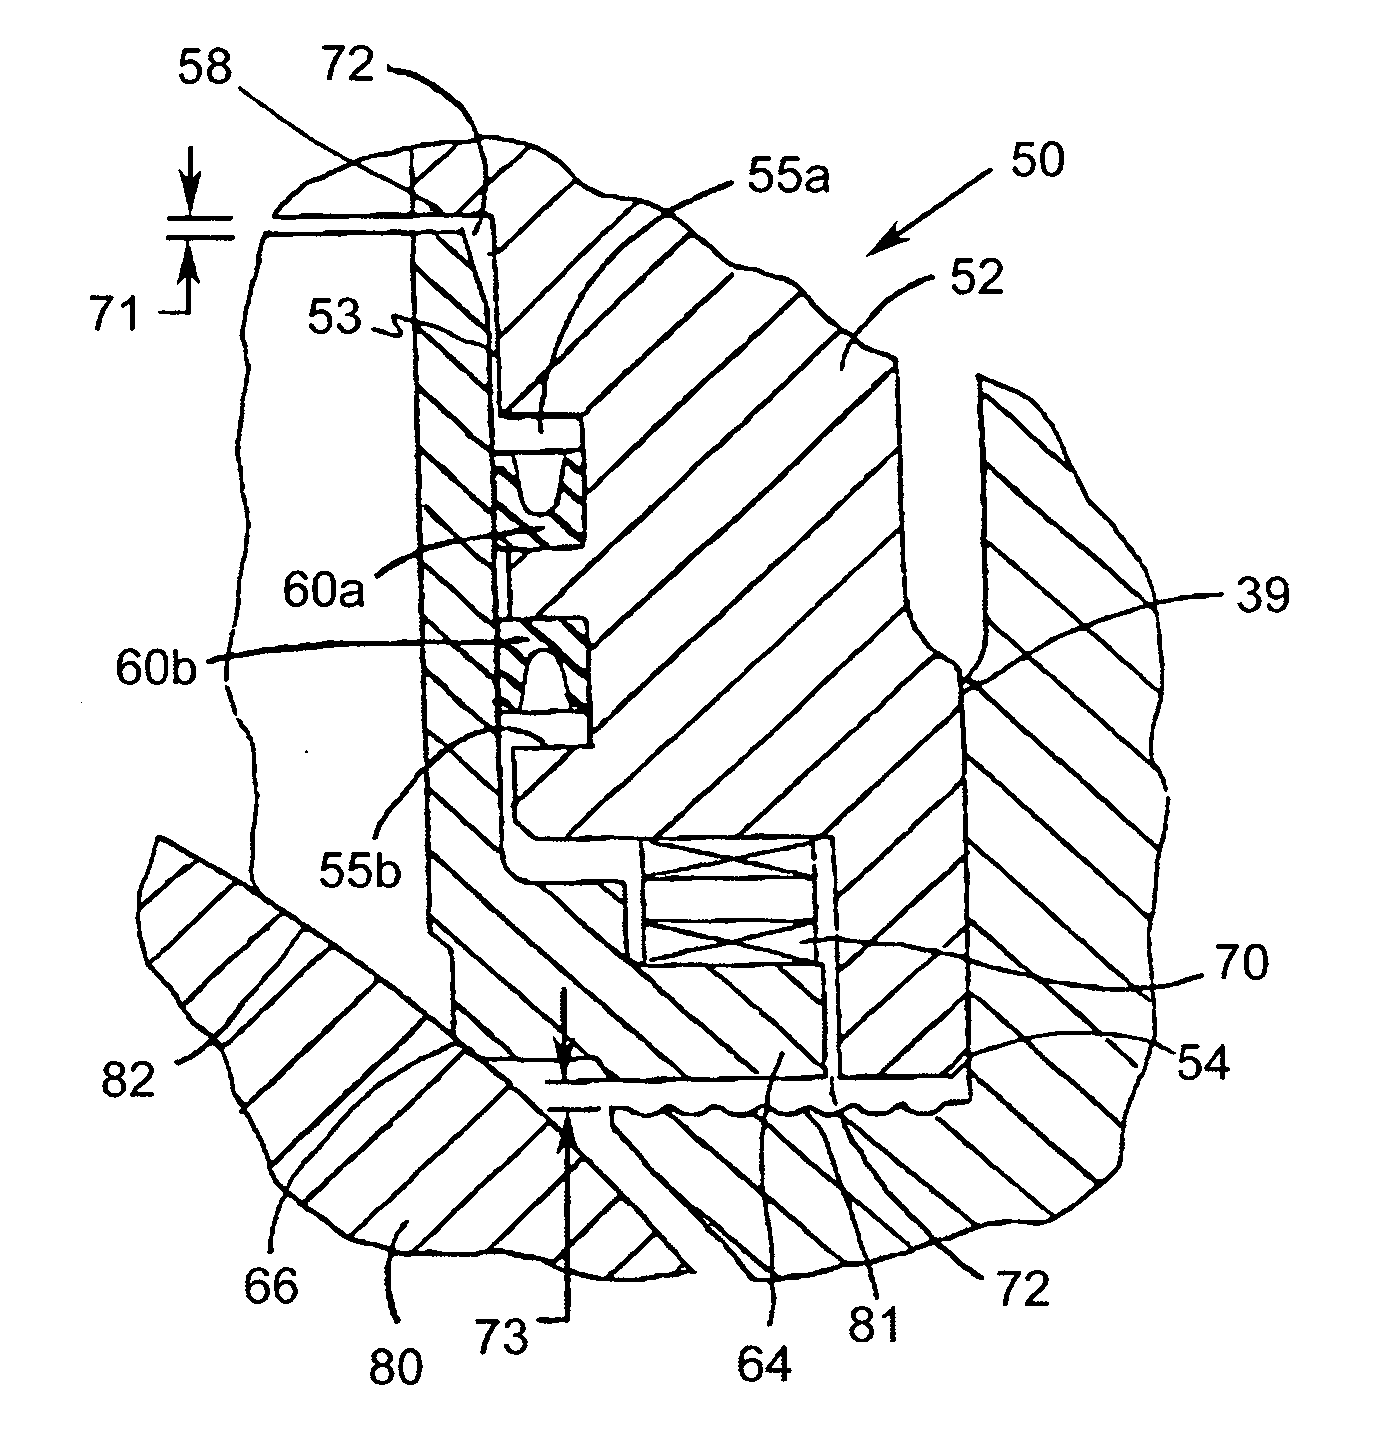 Fluid flow control valve with composition seal